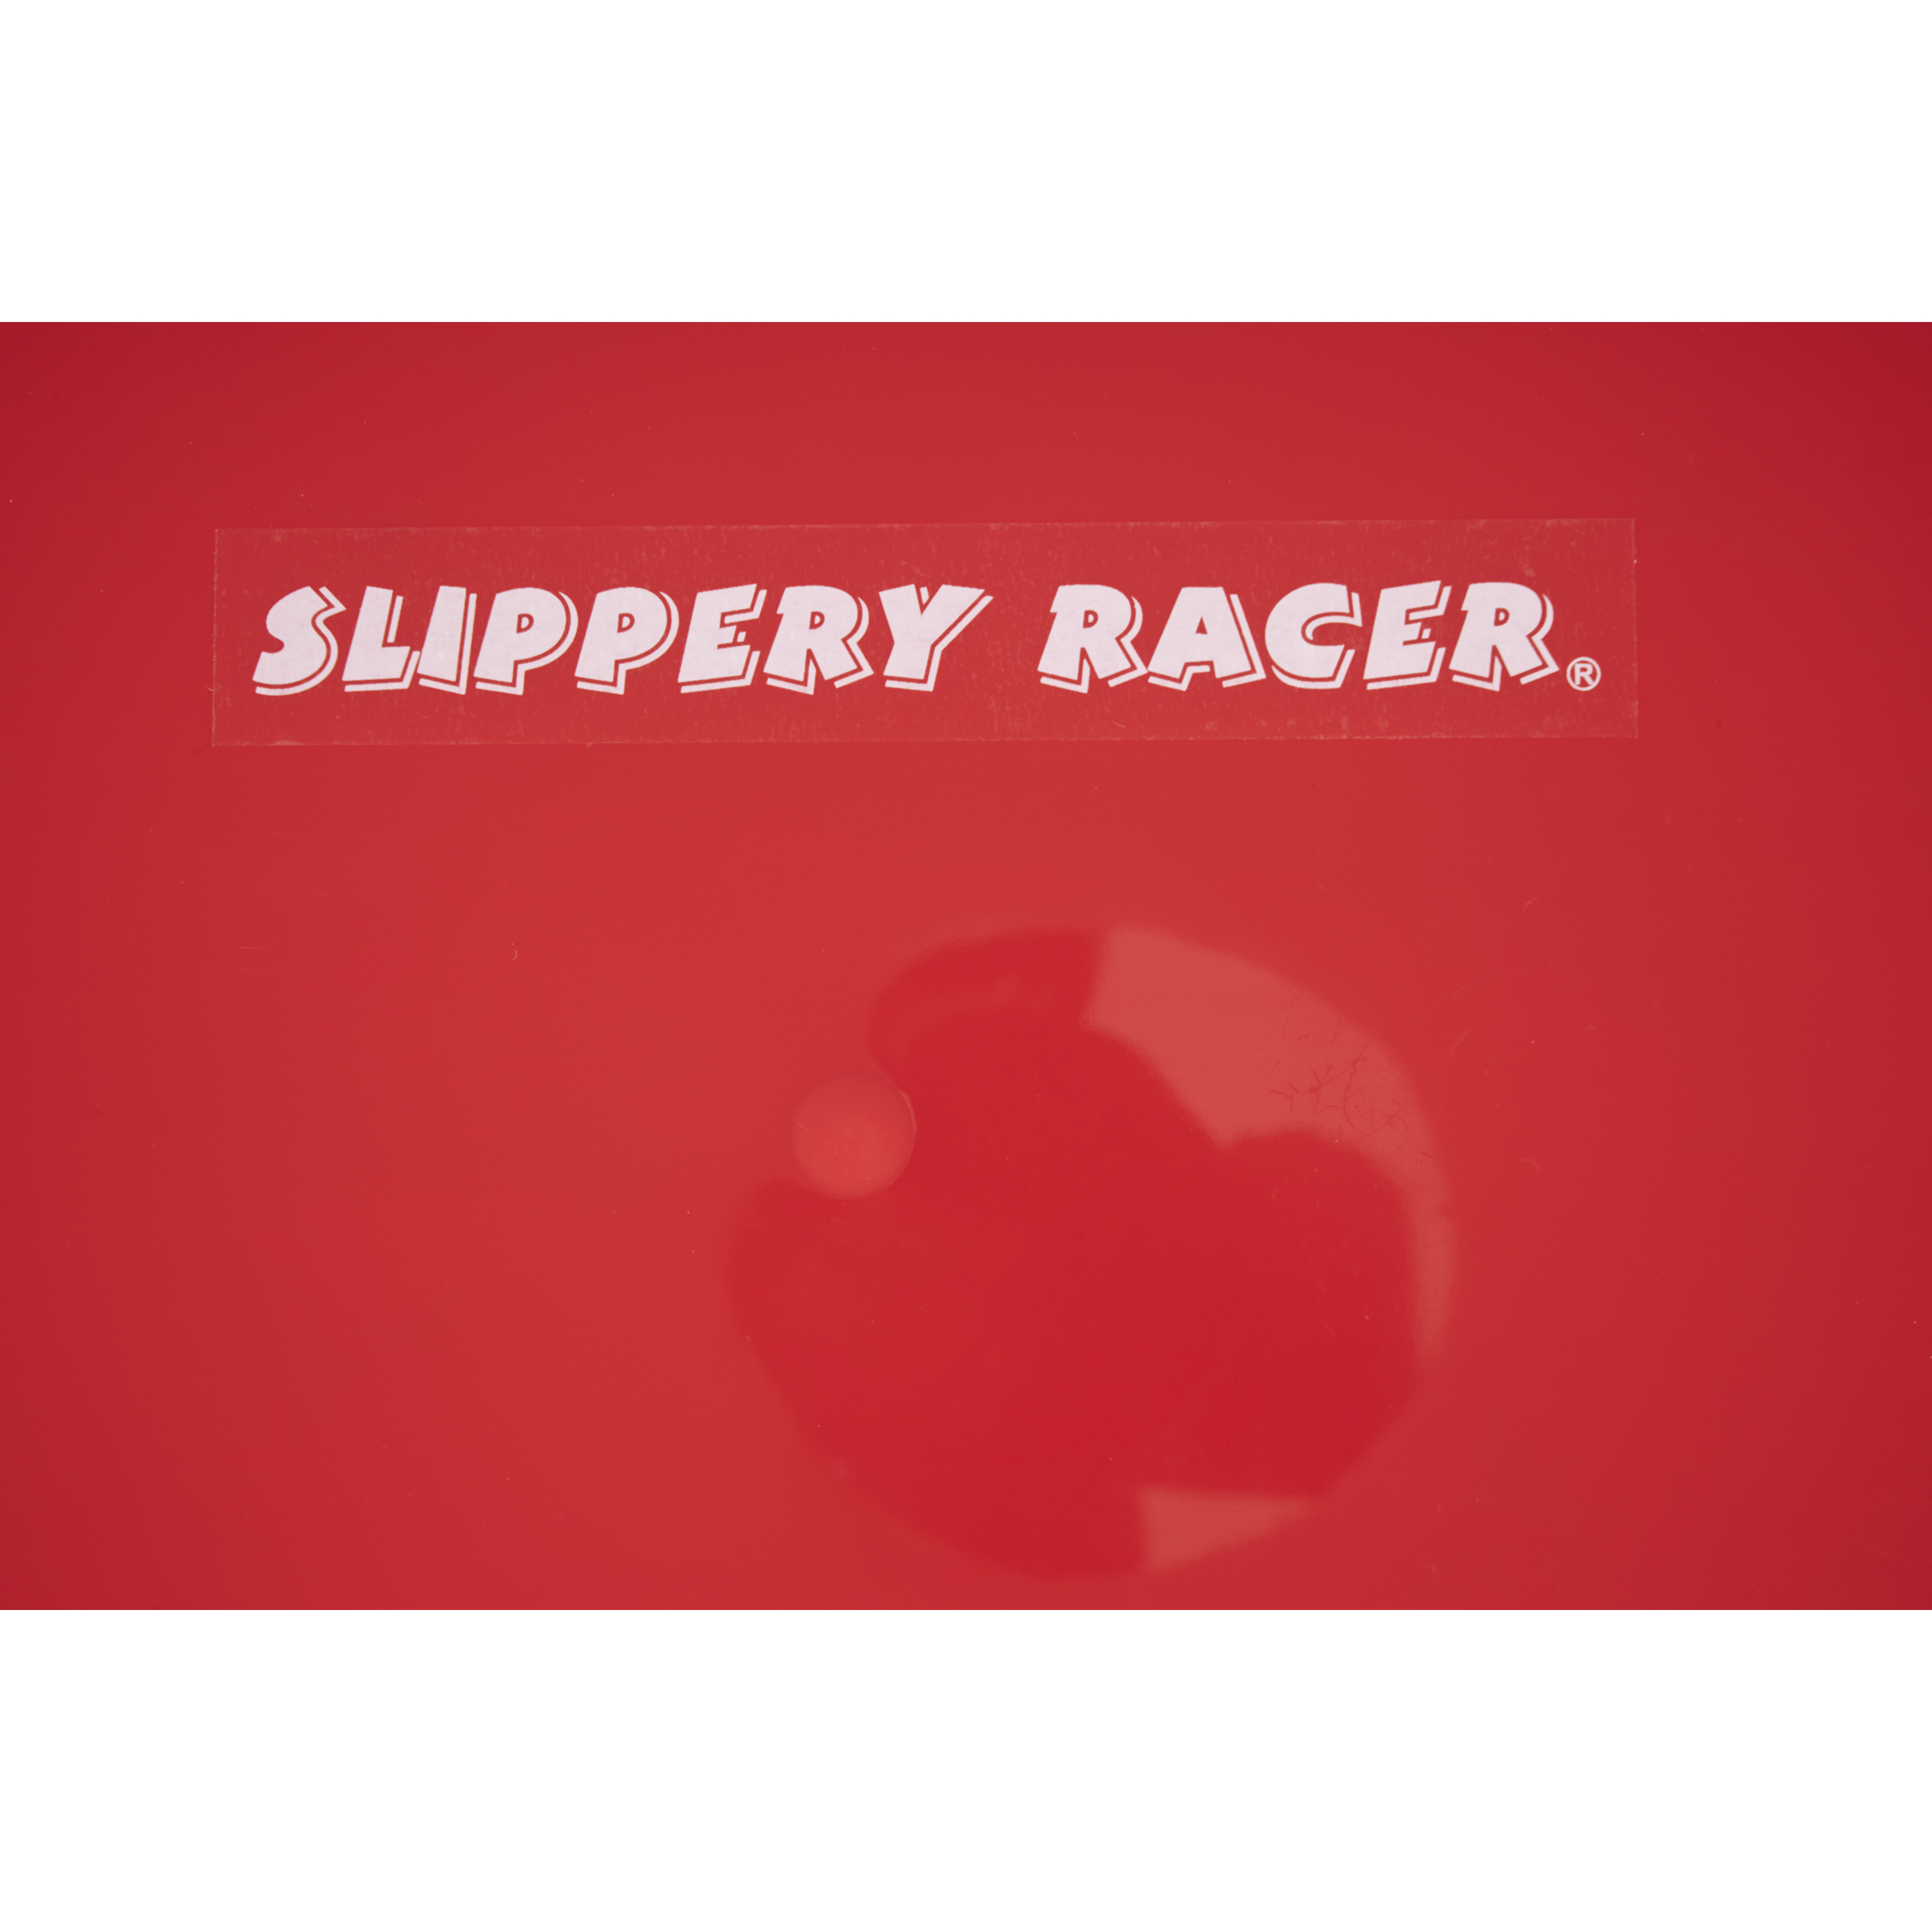 Slippery Racer Downhill Pro Adults and Kids Plastic Saucer Disc Snow Sled, Red - image 4 of 7